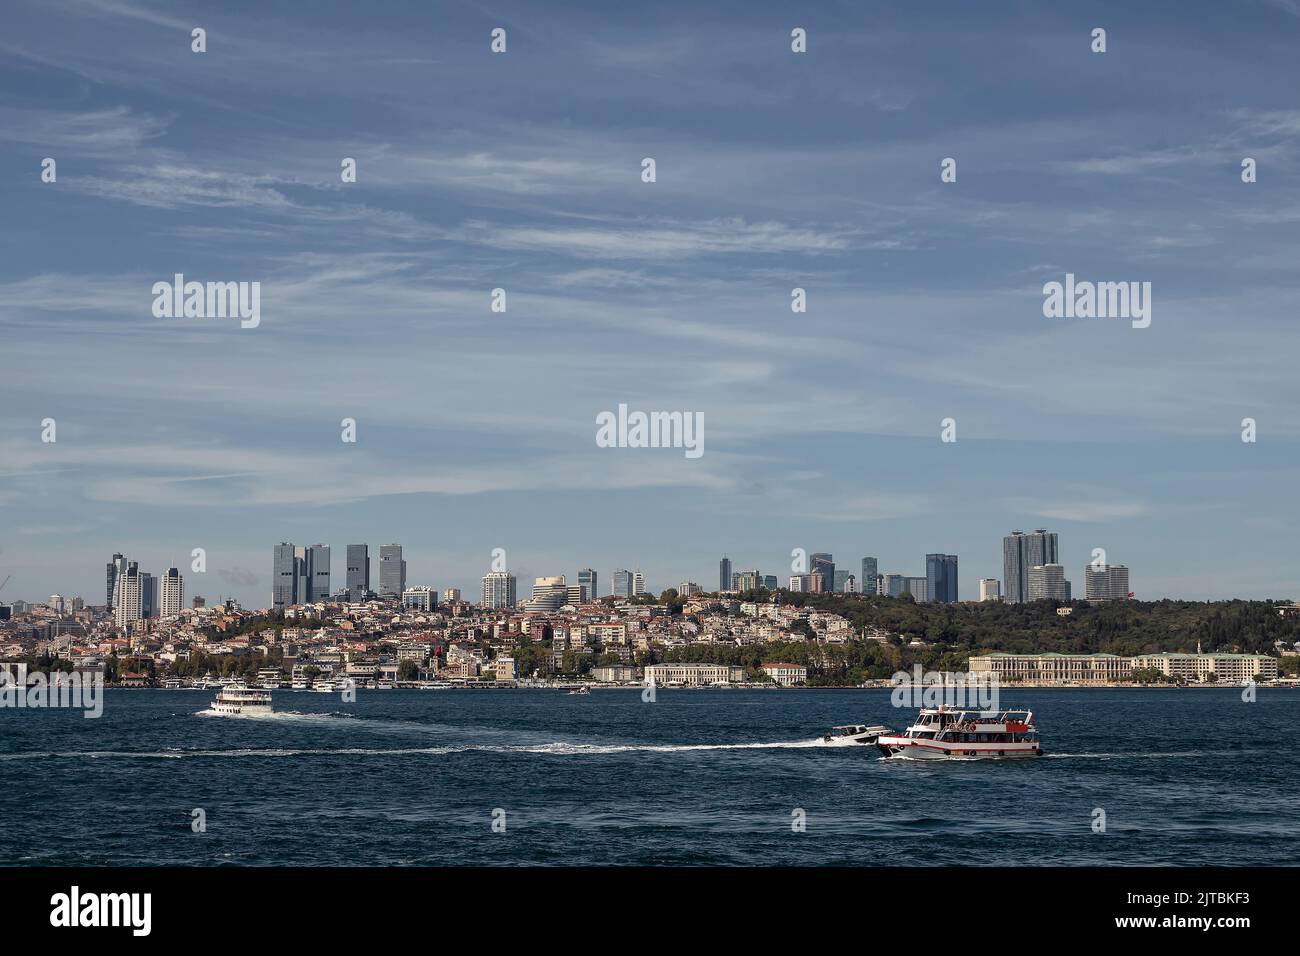 View of tour boats on Bosphorus and European side of Istanbul. It is a sunny summer day. Stock Photo